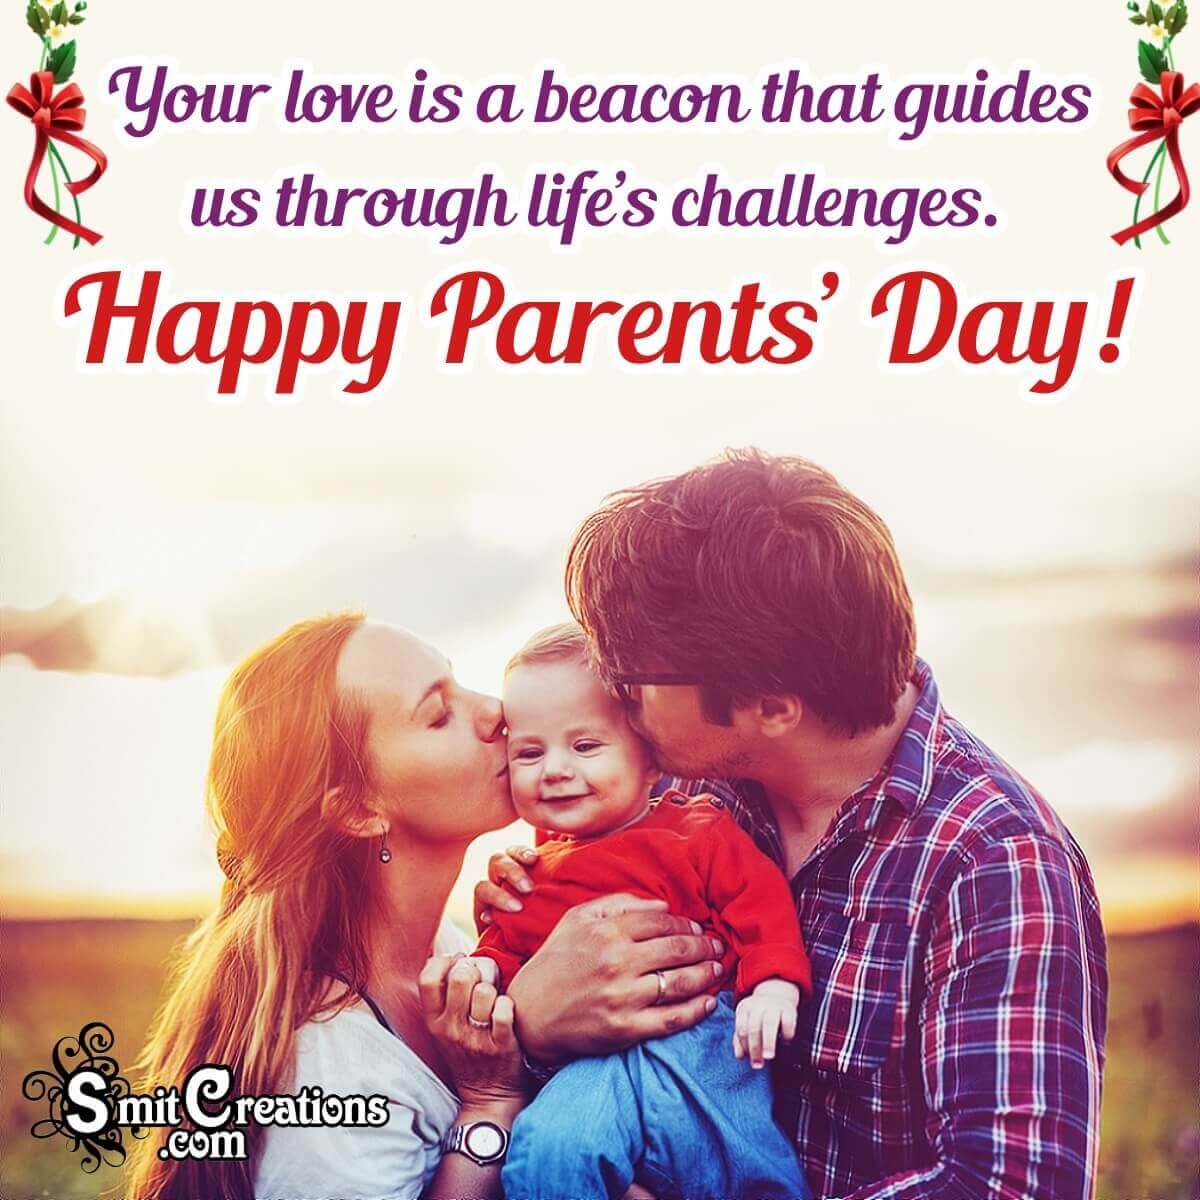 Happy Parents’ Day Message Picture